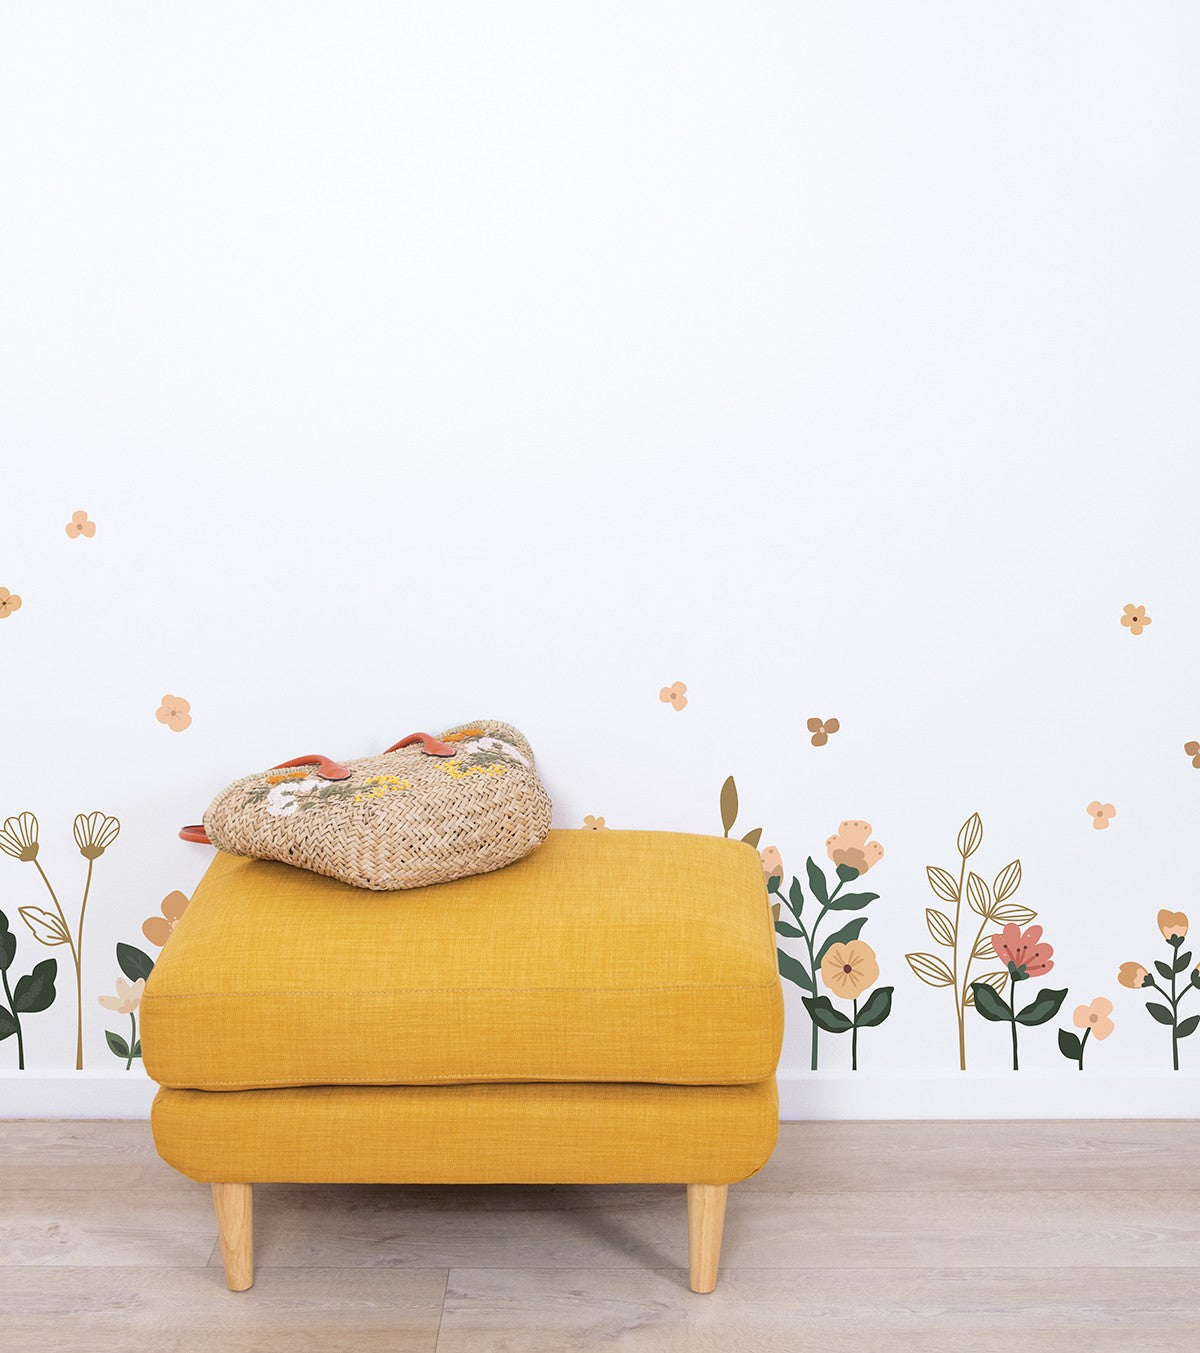 BLOEM - Wall decals murals - Large colorful flowers